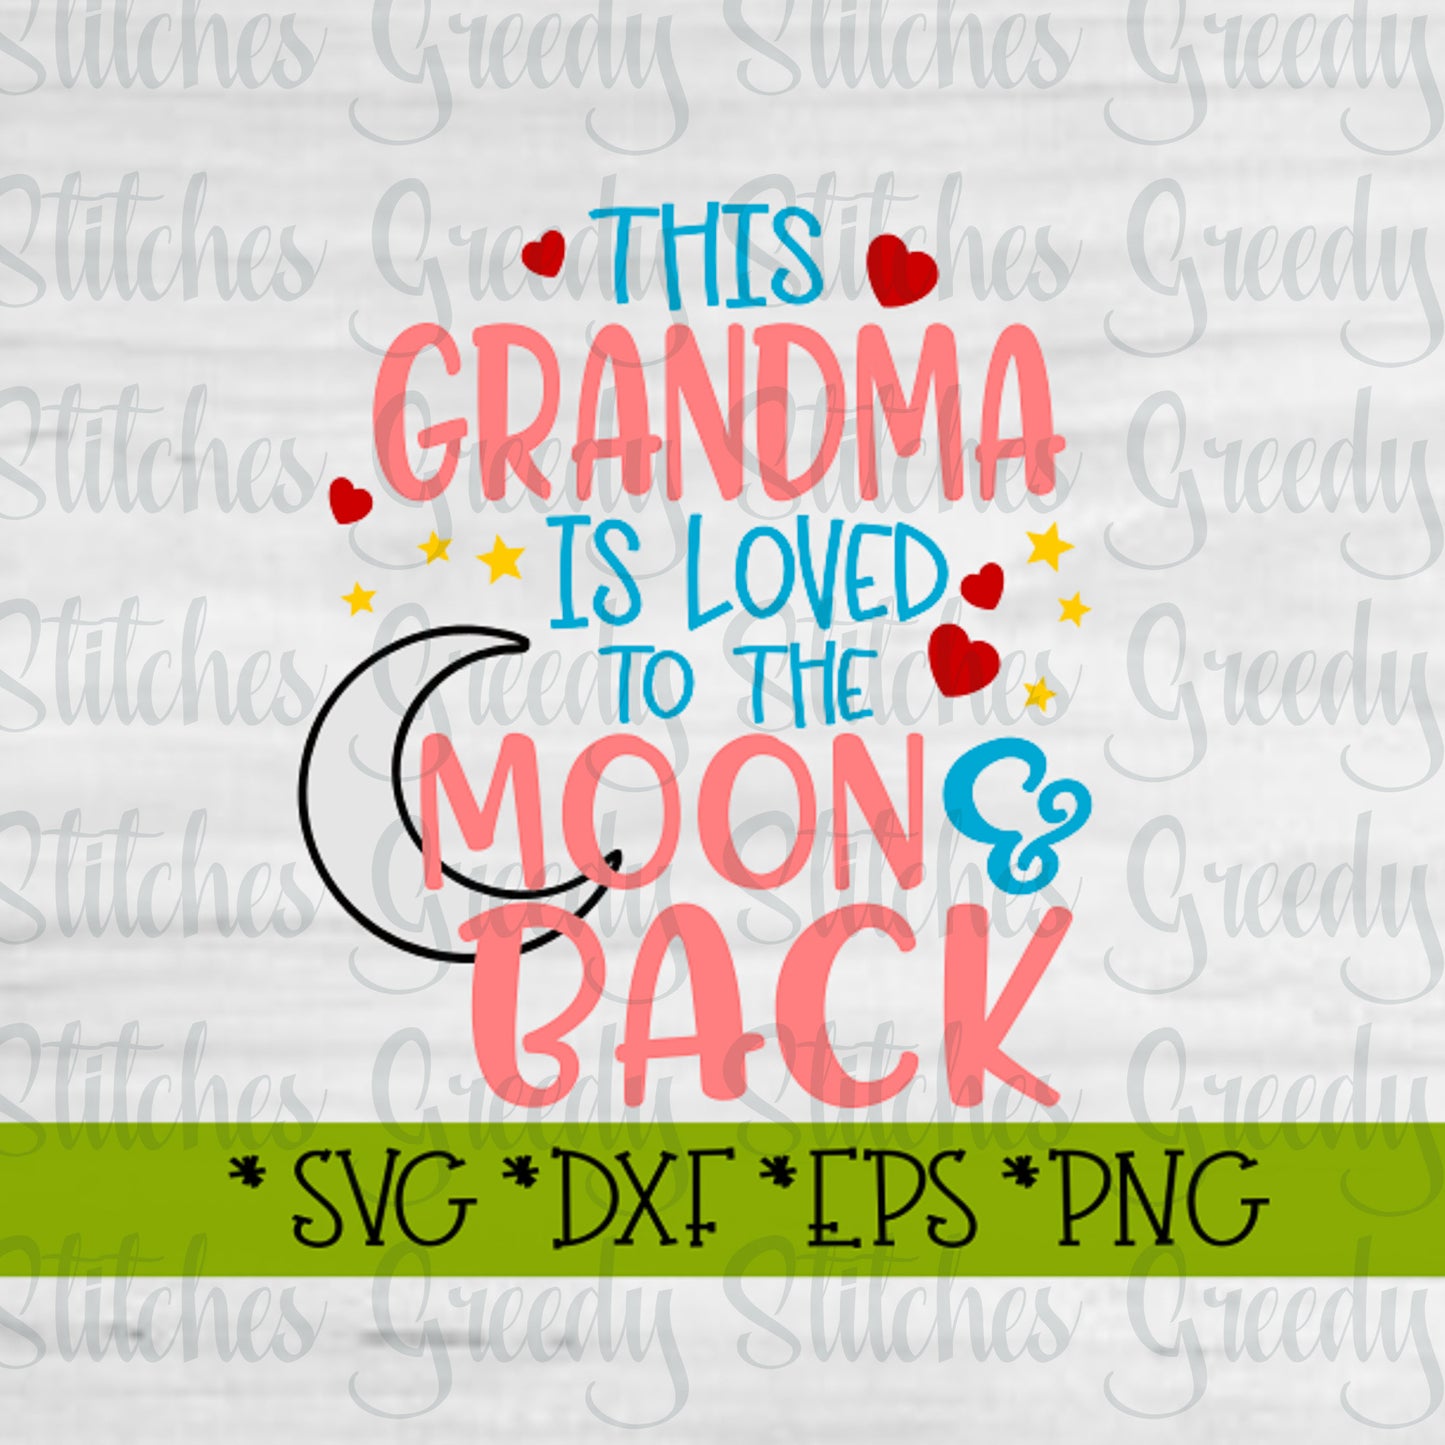 Mother&#39;s Day | This Grandma Is Loved To The Moon & Back svg, dxf, eps, png, wmf. Grandma SVG | Is Loved SVG | Instant Download Cut File